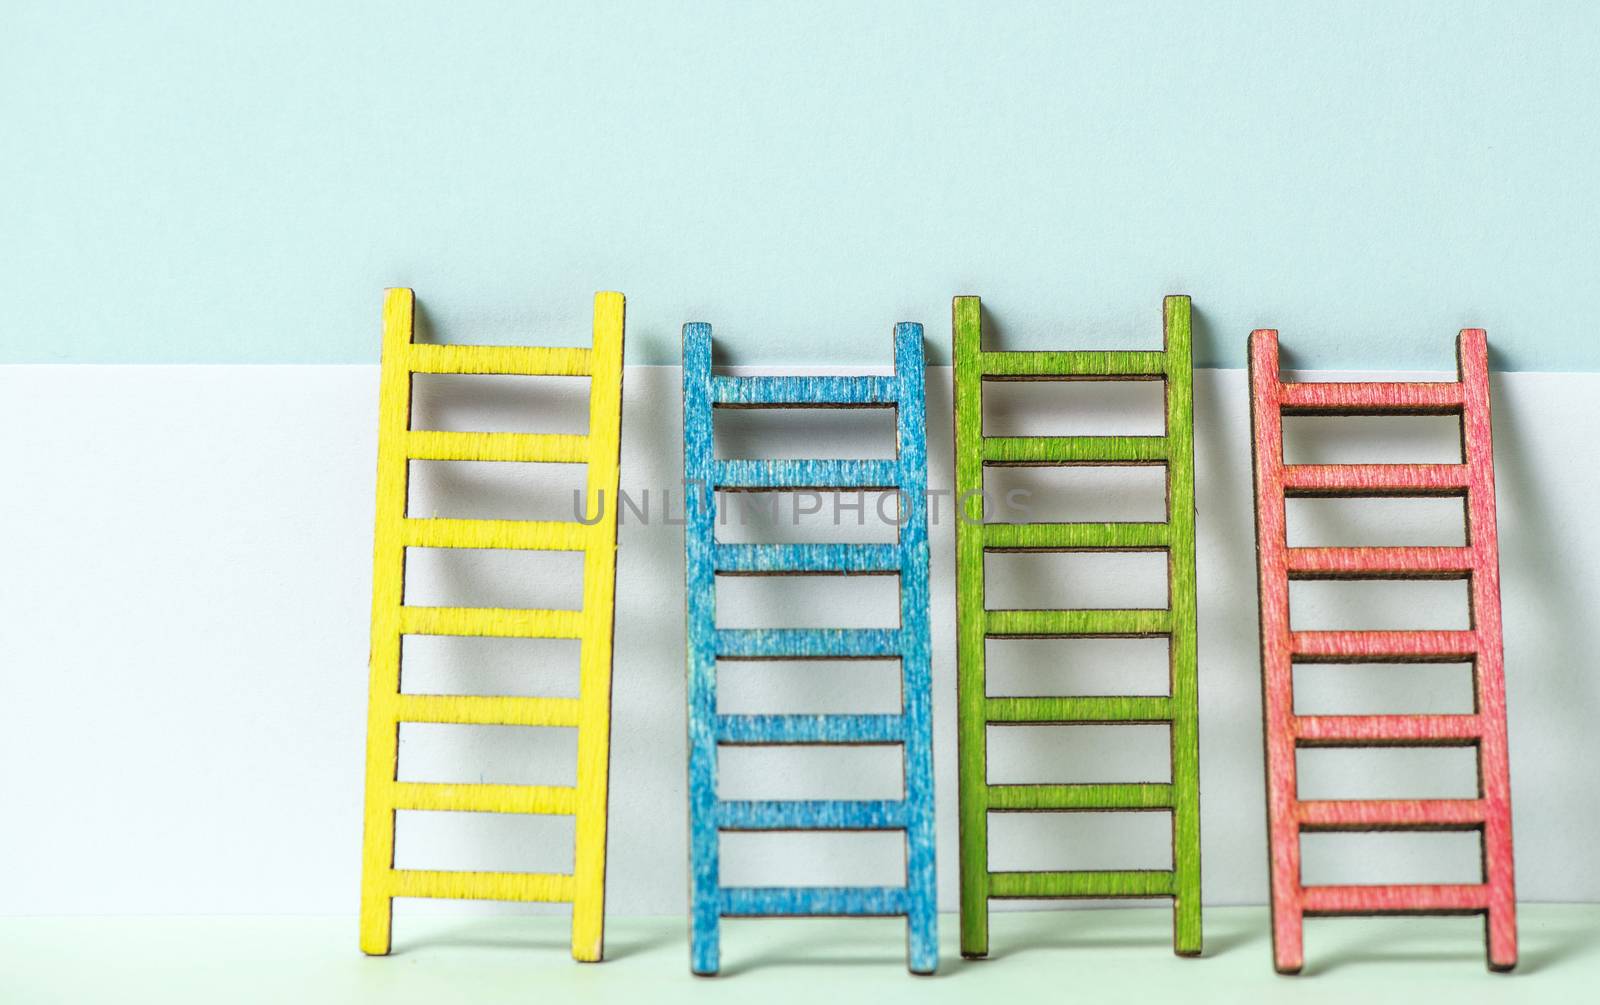 Multicoloured ladders on wall. Pastel tones. Concept for success and growth. Business metaphors.